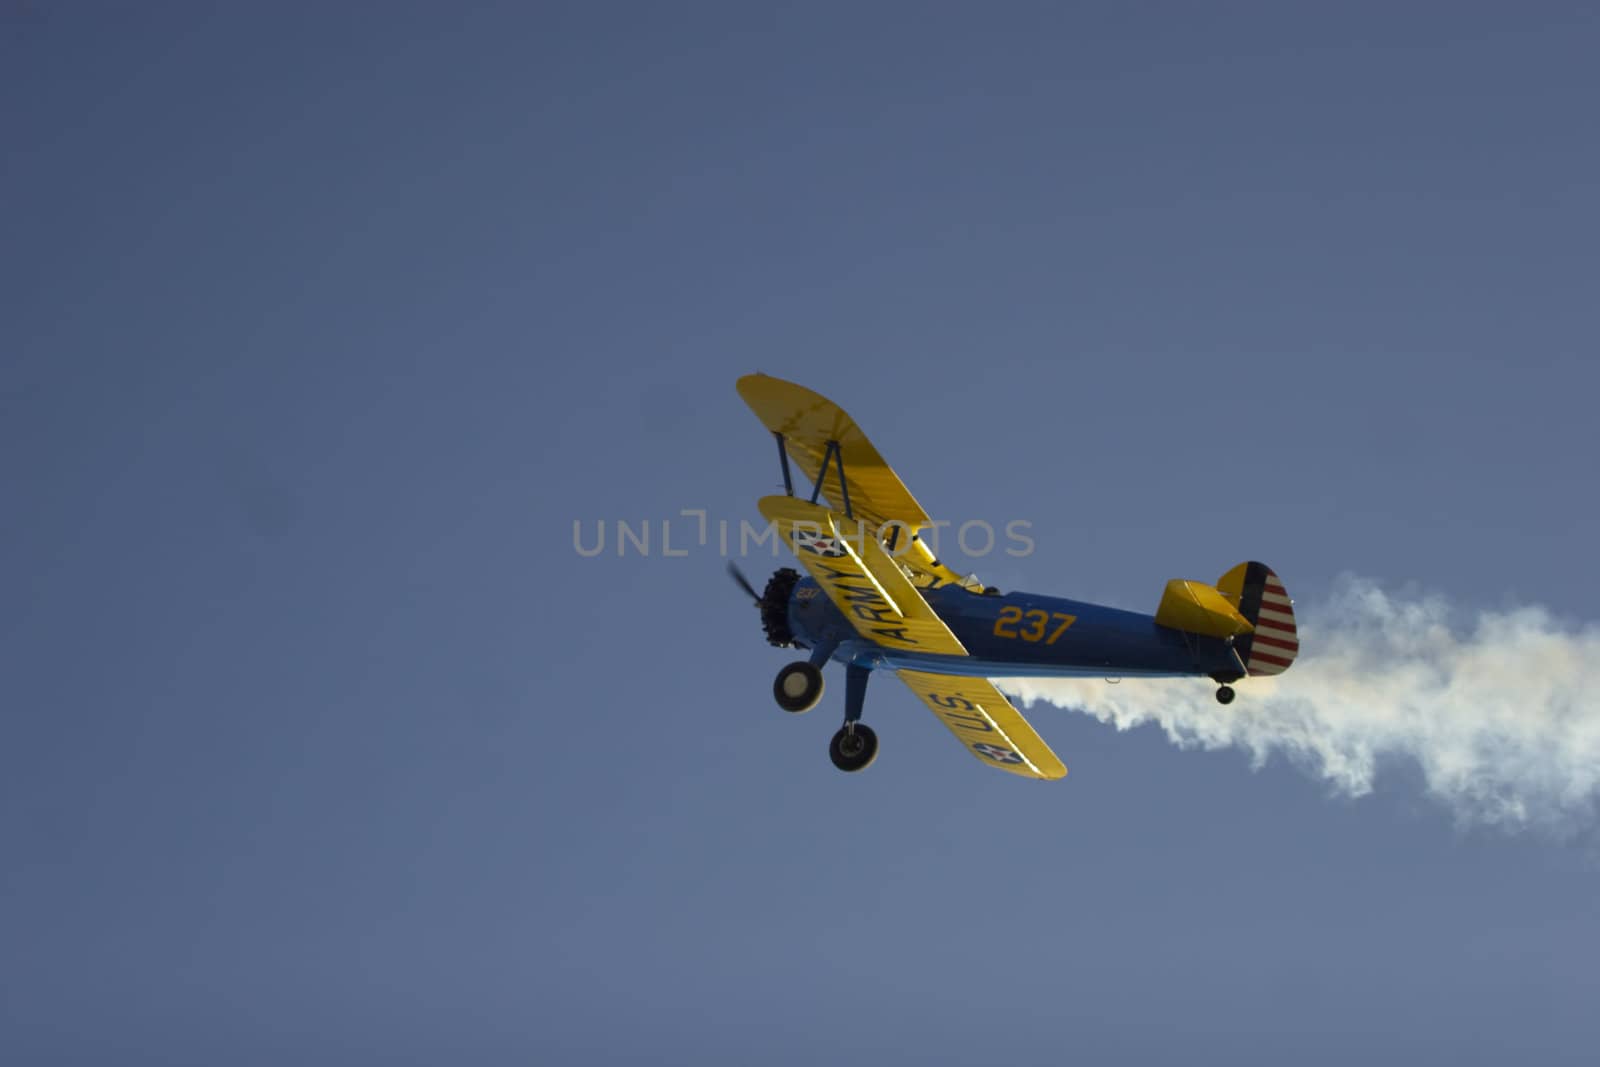 Air, Air-Show, Airplane, Airshow, Aviation, Blue, Fast, Flight, Fly, Hornet, Jet, Military,  Perfection, Performance, Precision, Show, Sky, Team, airplane, biplane,